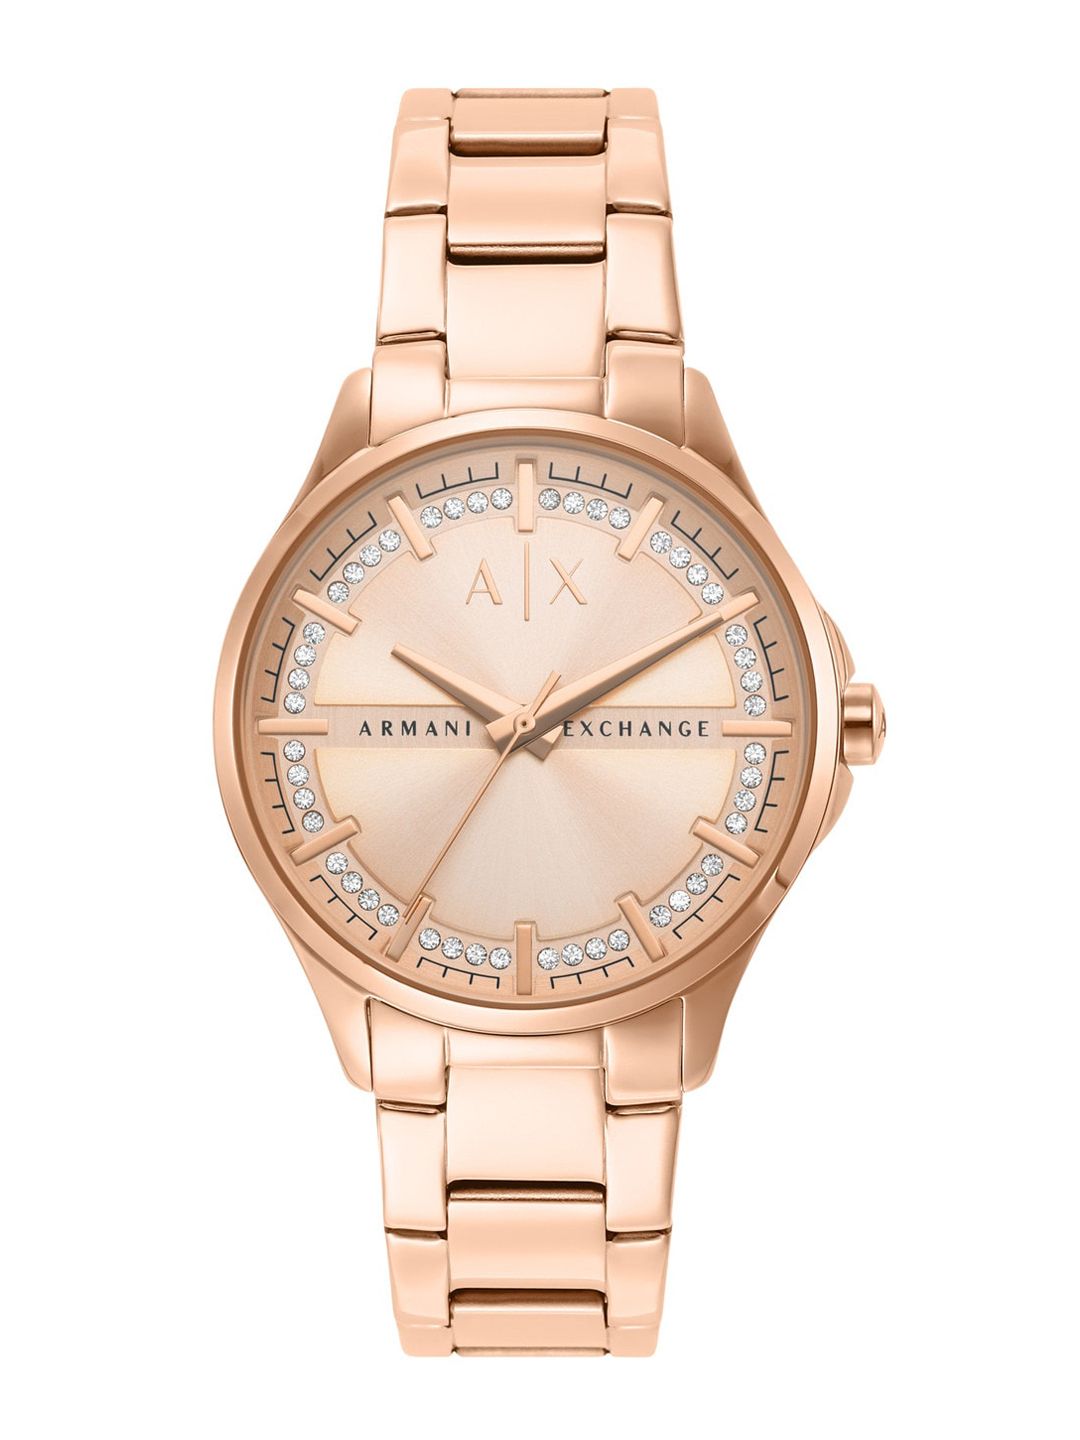 Armani Exchange Women Rose Gold-Toned Dial & Rose Gold-Plated Bracelet Style Watch AX5264 Price in India